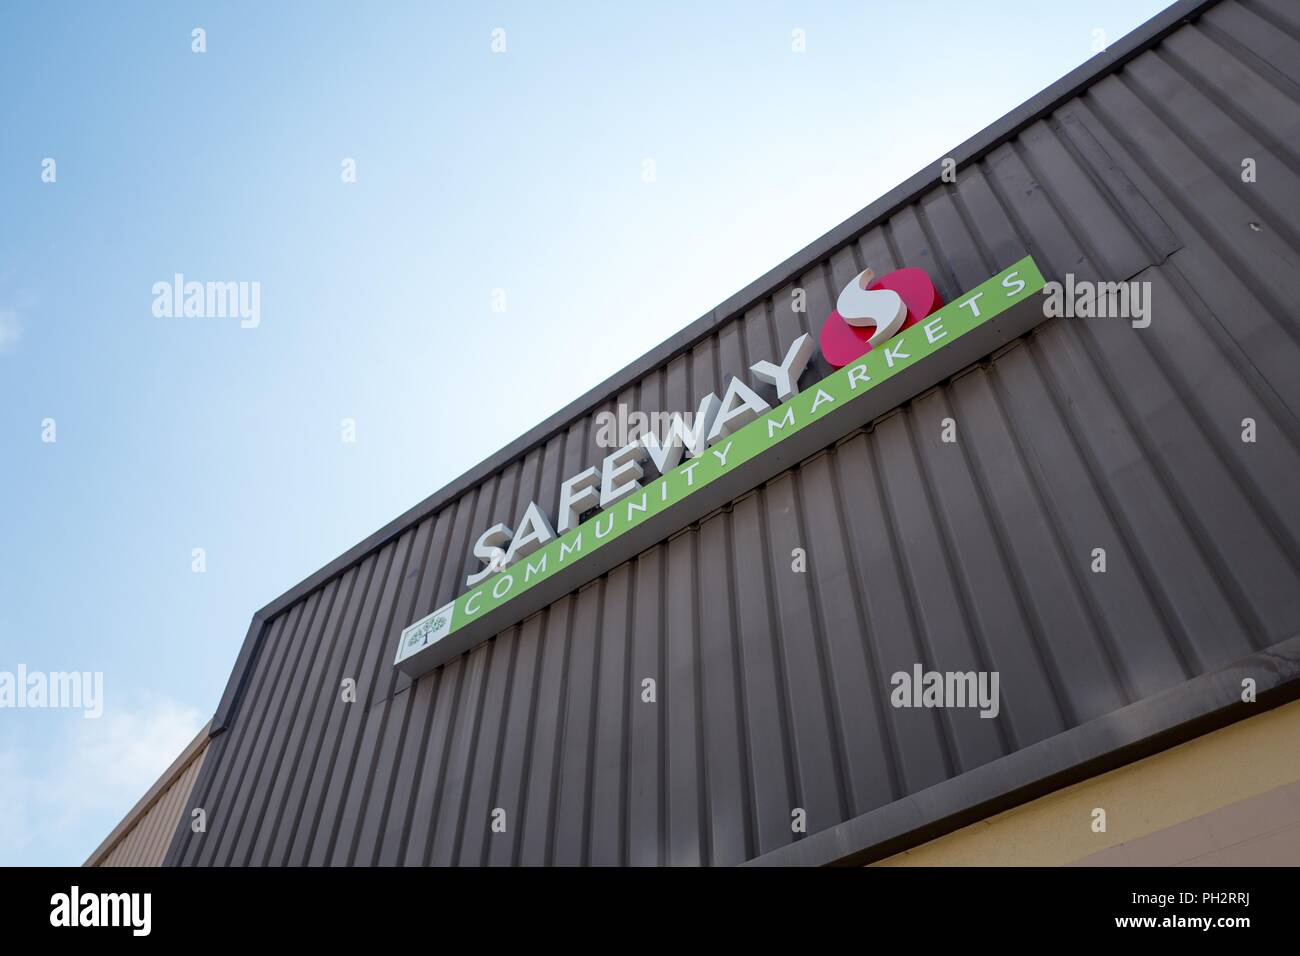 Facade of Safeway Community Markets grocery store in Thousand Oaks, Berkeley, California, August 14, 2018. () Stock Photo